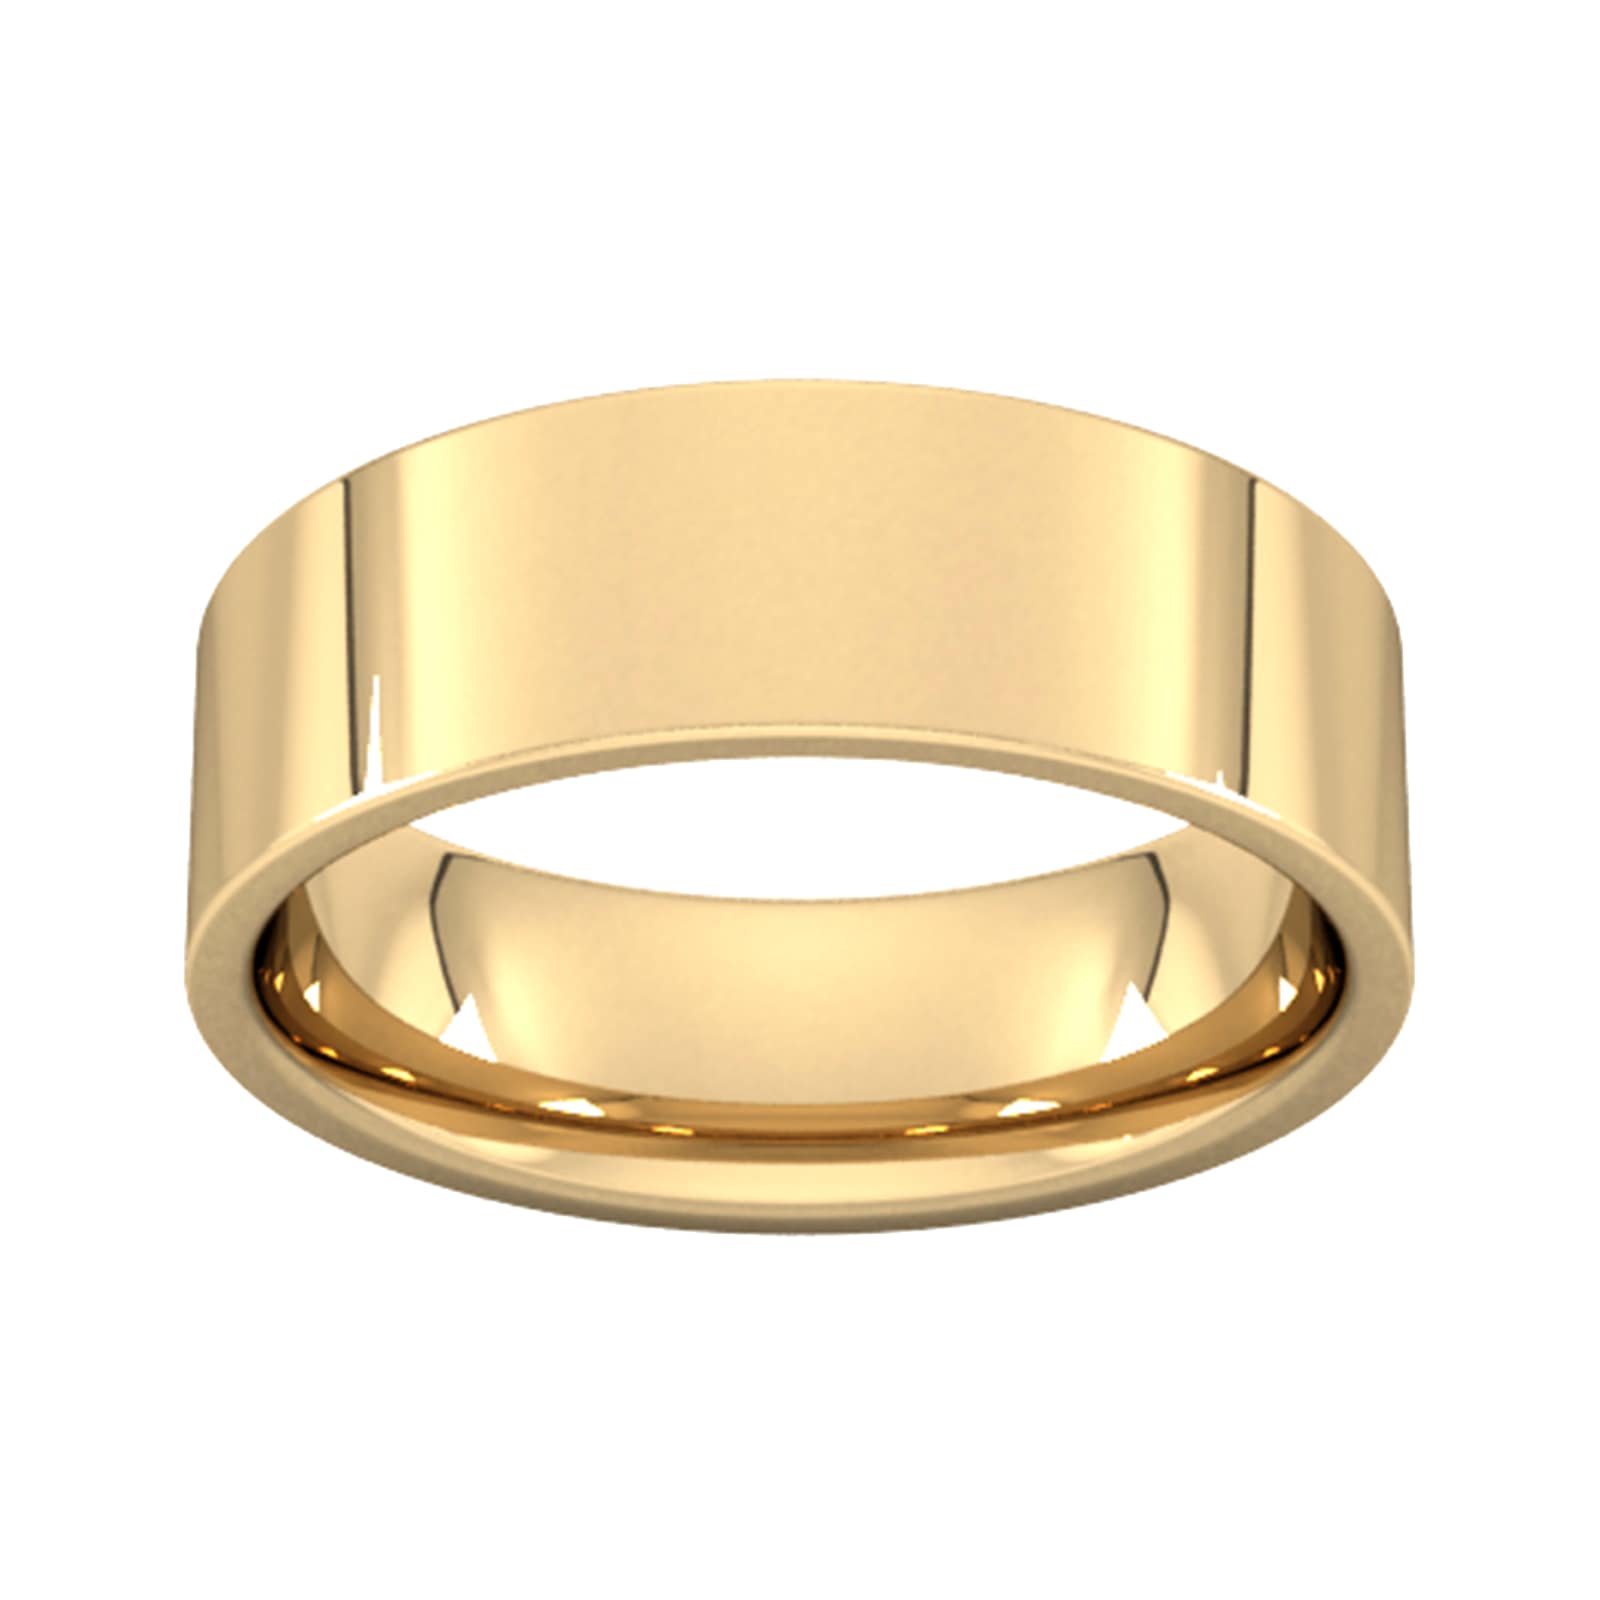 7mm Flat Court Heavy Wedding Ring In 18 Carat Yellow Gold - Ring Size T